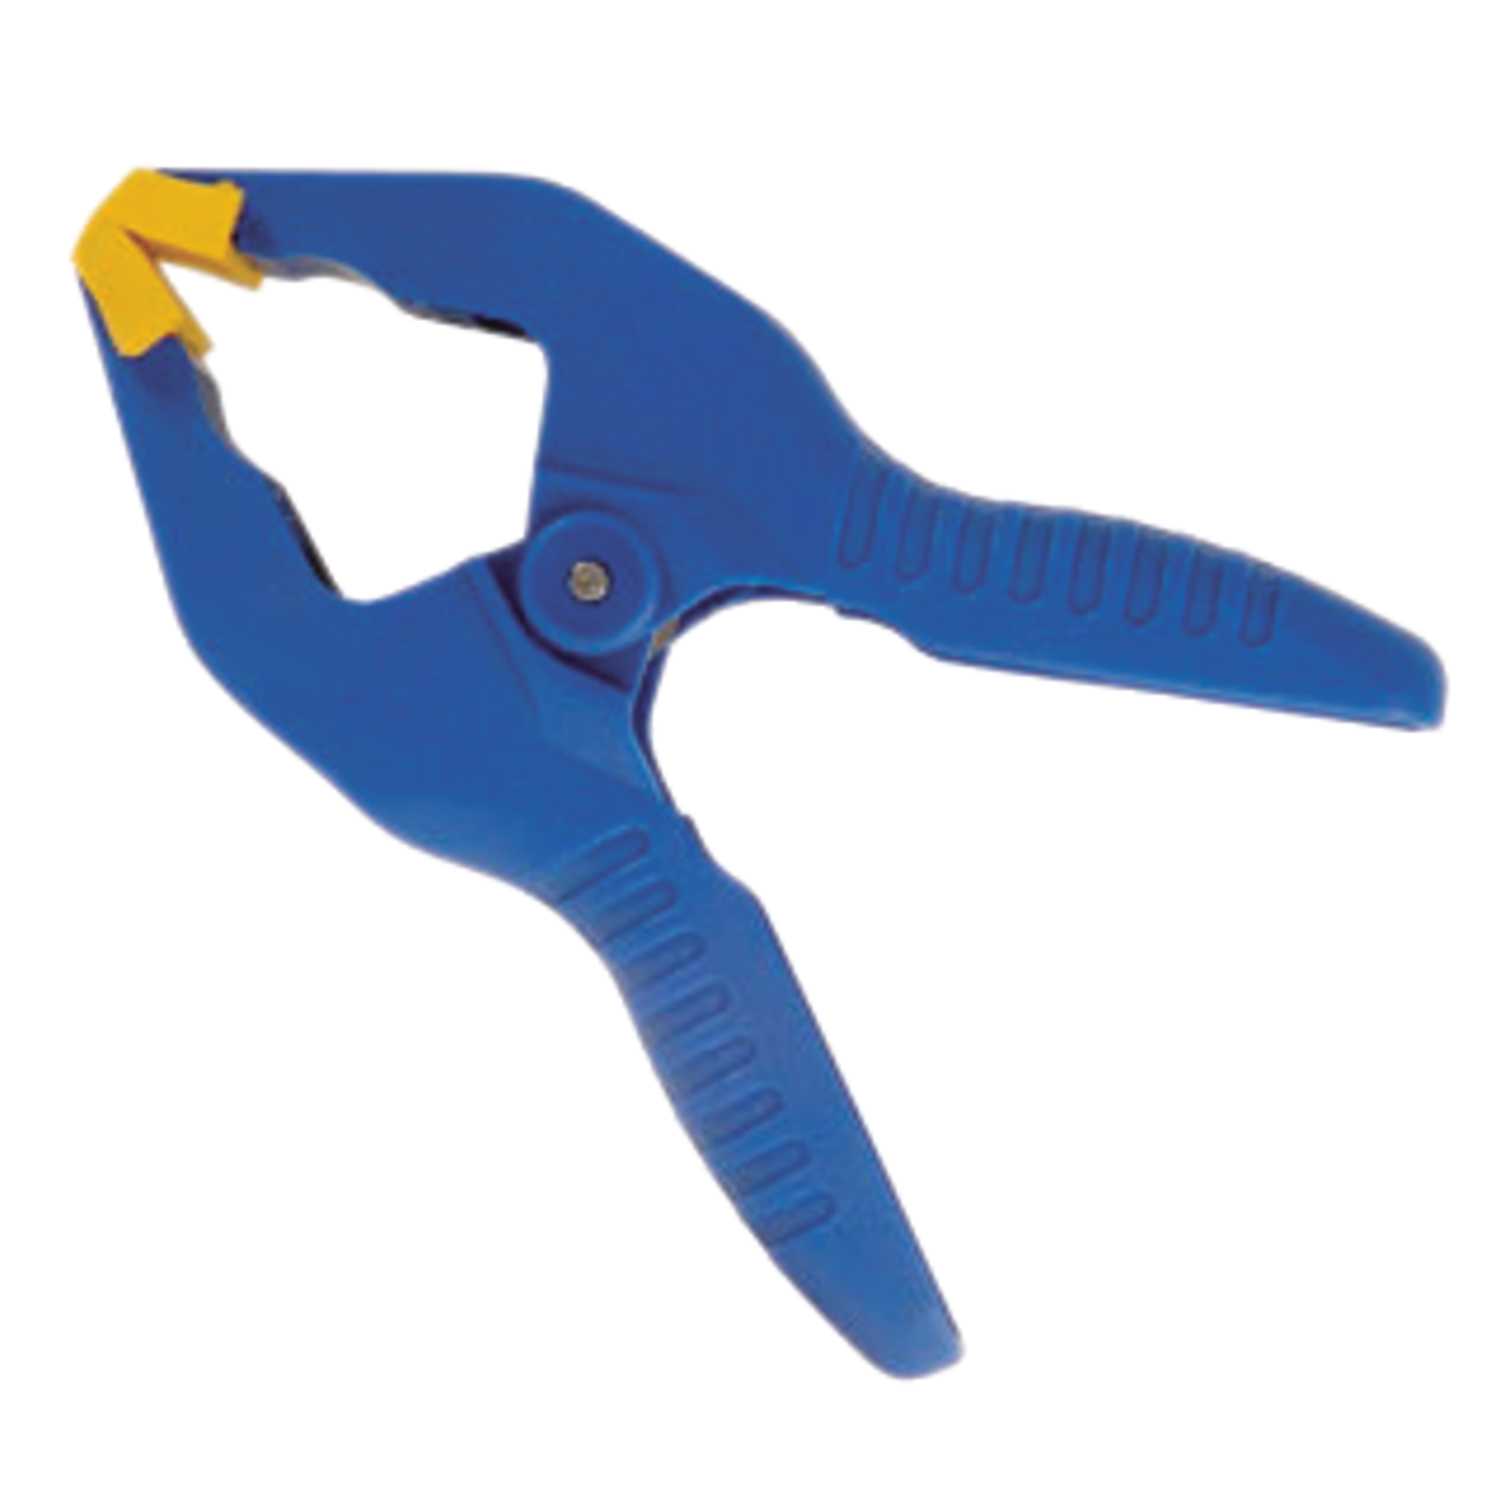 Irwin 2 in. Resin Spring Clamp 2 lb. capacity Blue Ace